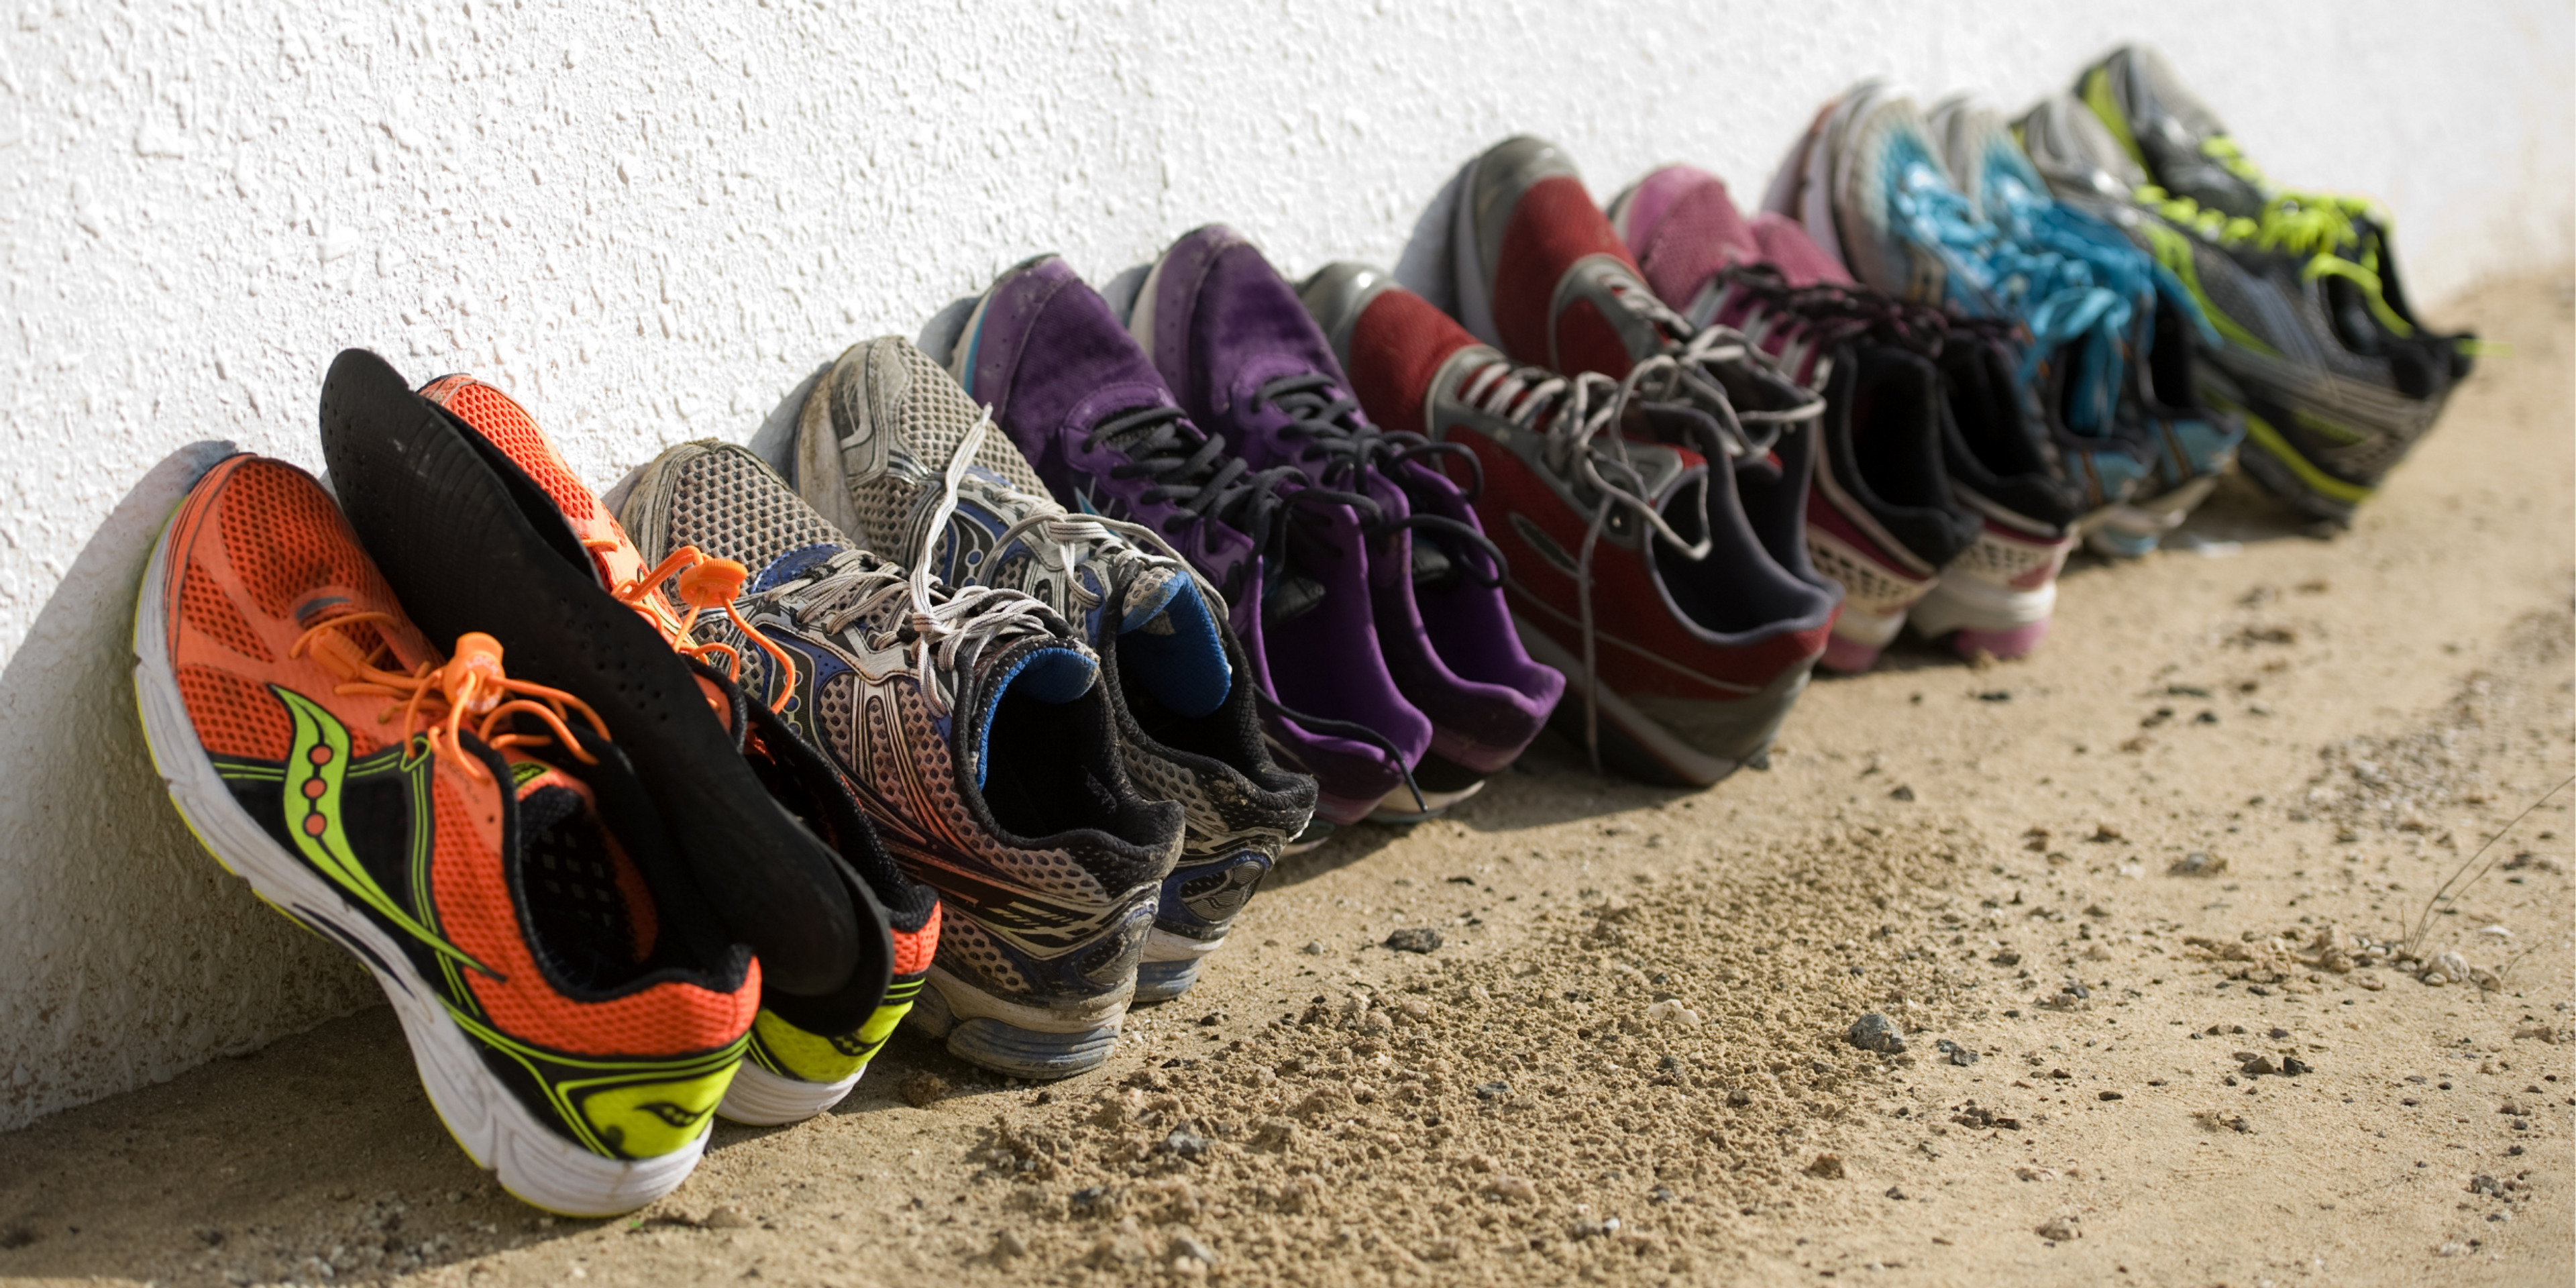 Choose different kind of shoes for different kind of sports to prevent ankle sprains